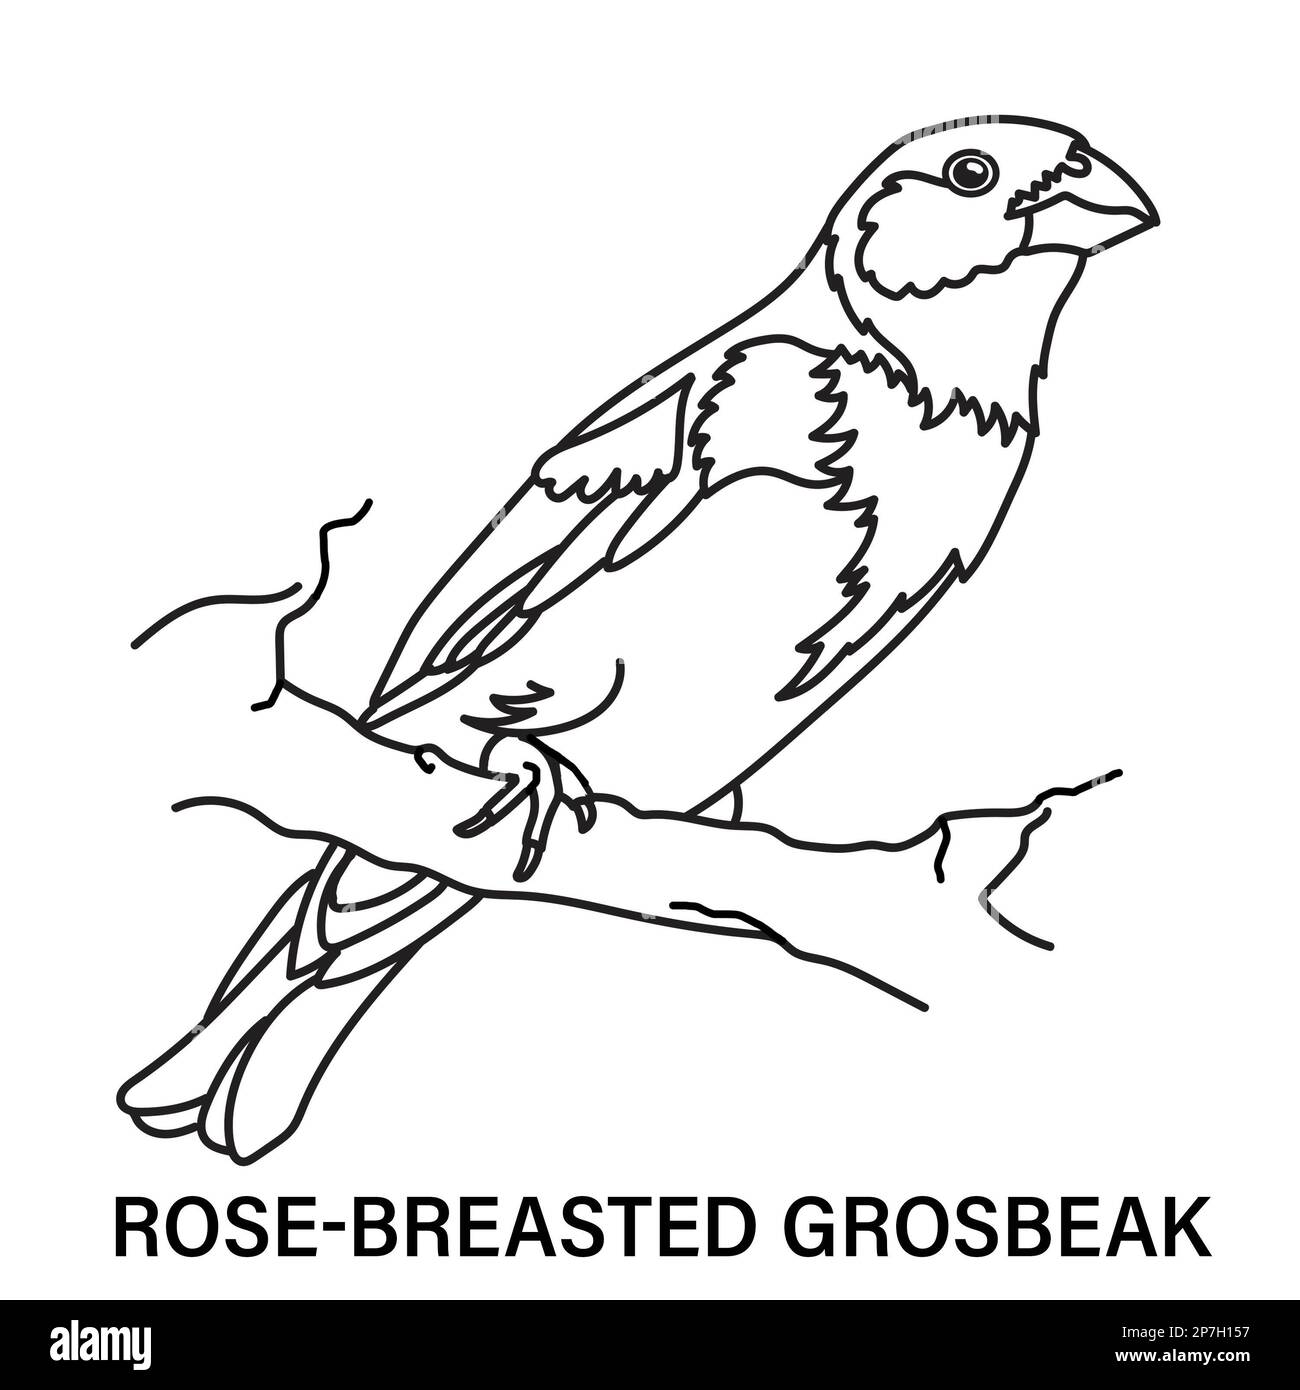 Illustration of a male rose-breasted grosbeak, or cutthroat, on a white background. Coloring page for fun or learning. Include identification of bird. Stock Photo